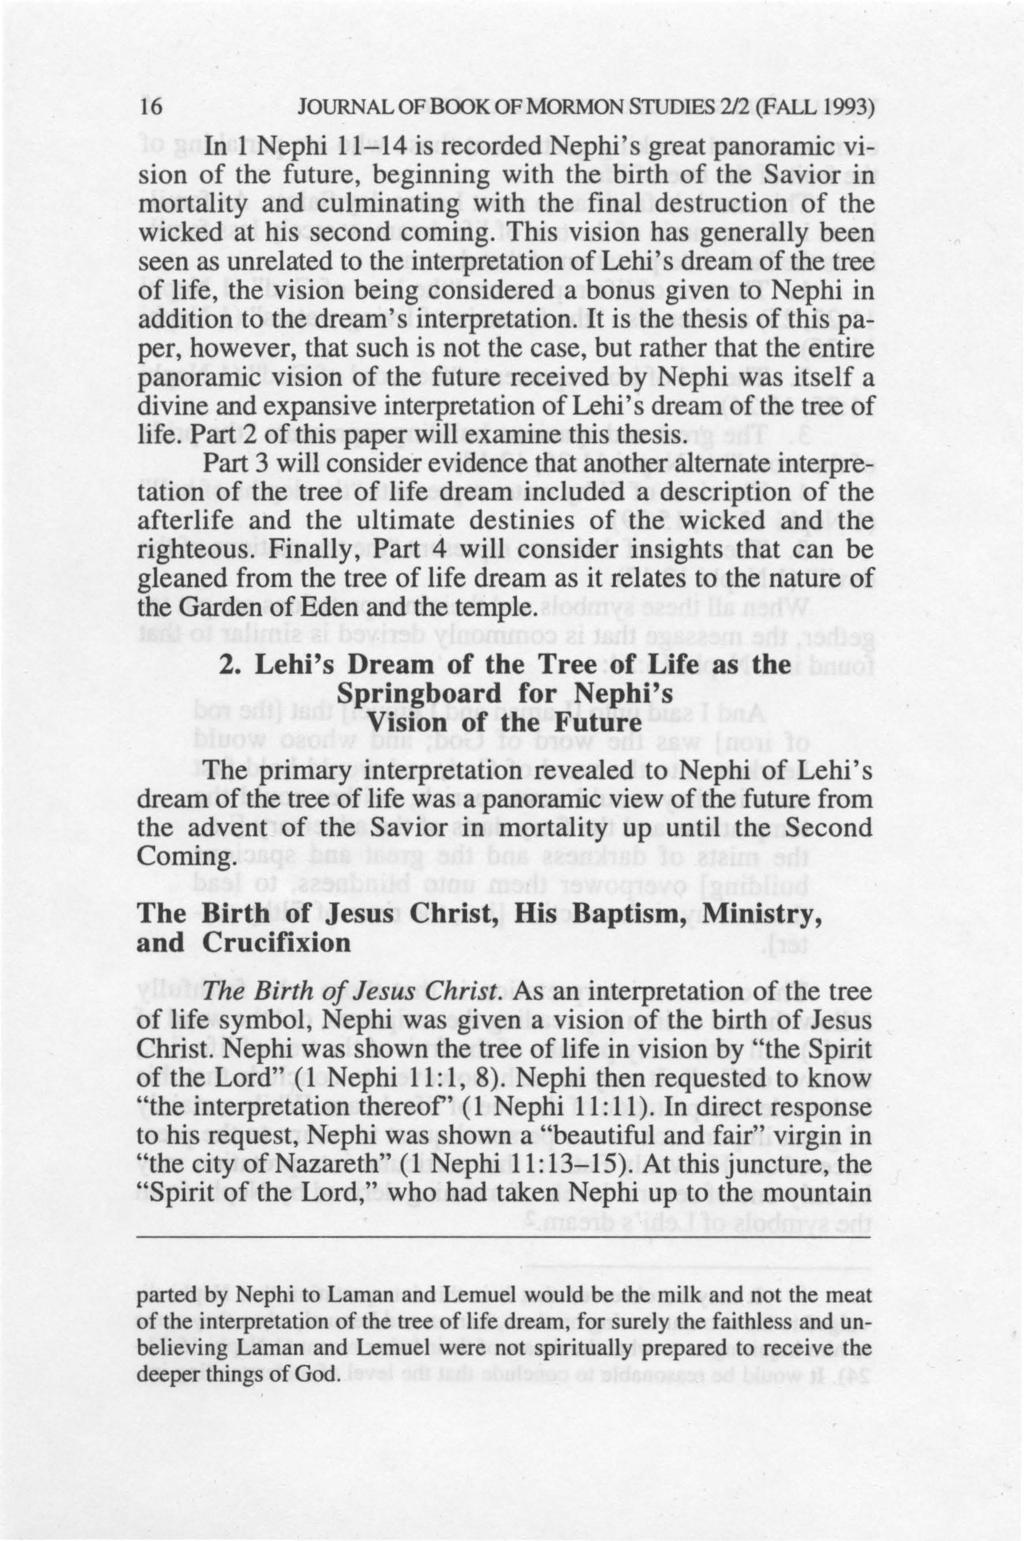 16 JOURNAL OF BOOK OF MORMON STUDIES 212 (FALL 1993) In 1 Nephi 11-14 is recorded Nephi's great panoramic vision of the future, beginning with the birth of the Savior in mortality and culminating